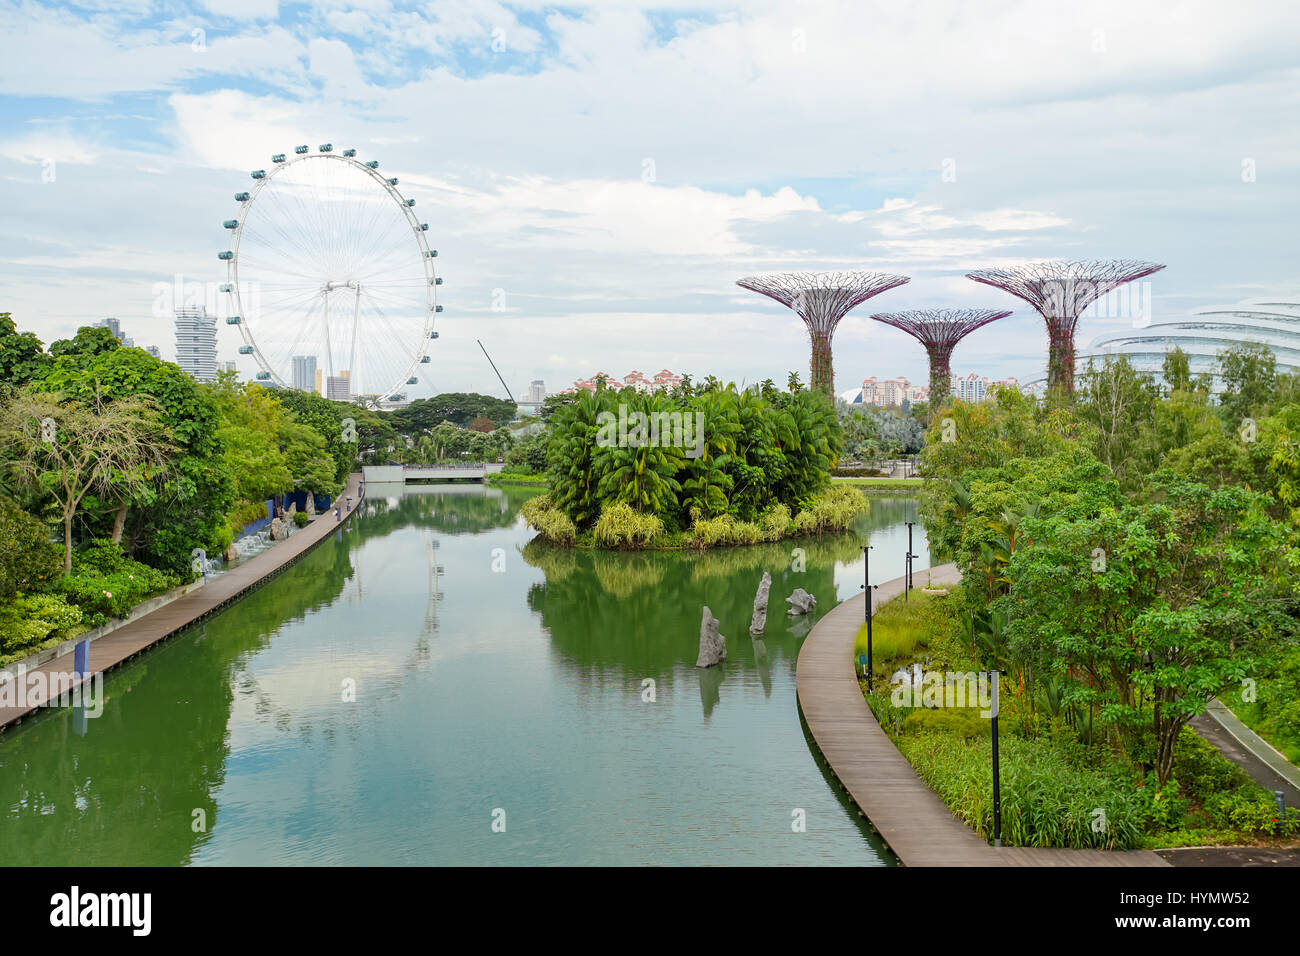 MARINA BAY, SINGAPORE - JAN 20, 2017: Landscape of Gardens by the bay, Supertree grove and Singapore flyer in Singapore. Stock Photo